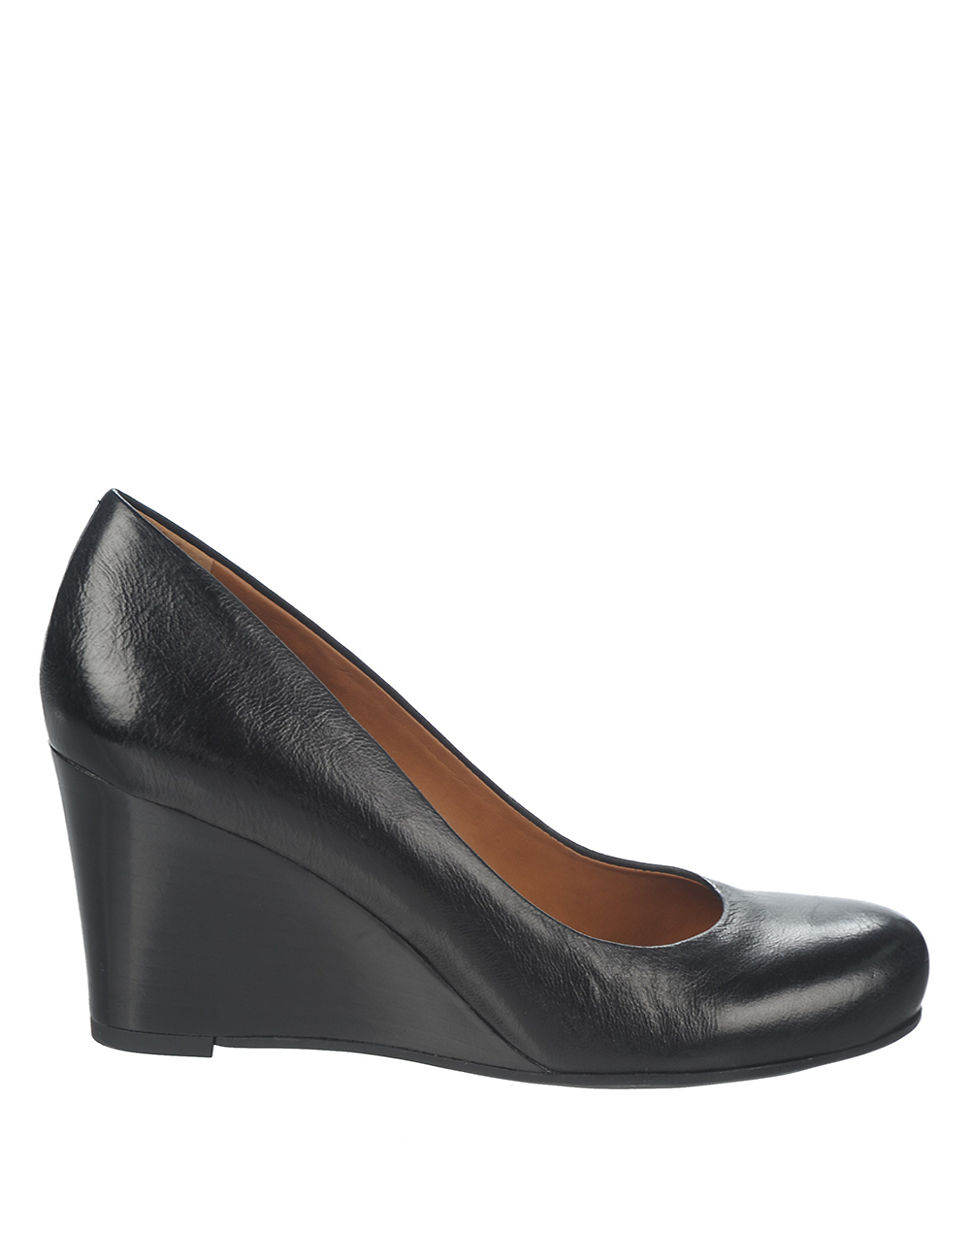 Franco sarto Rina Leather Wedge Pumps in Black | Lyst